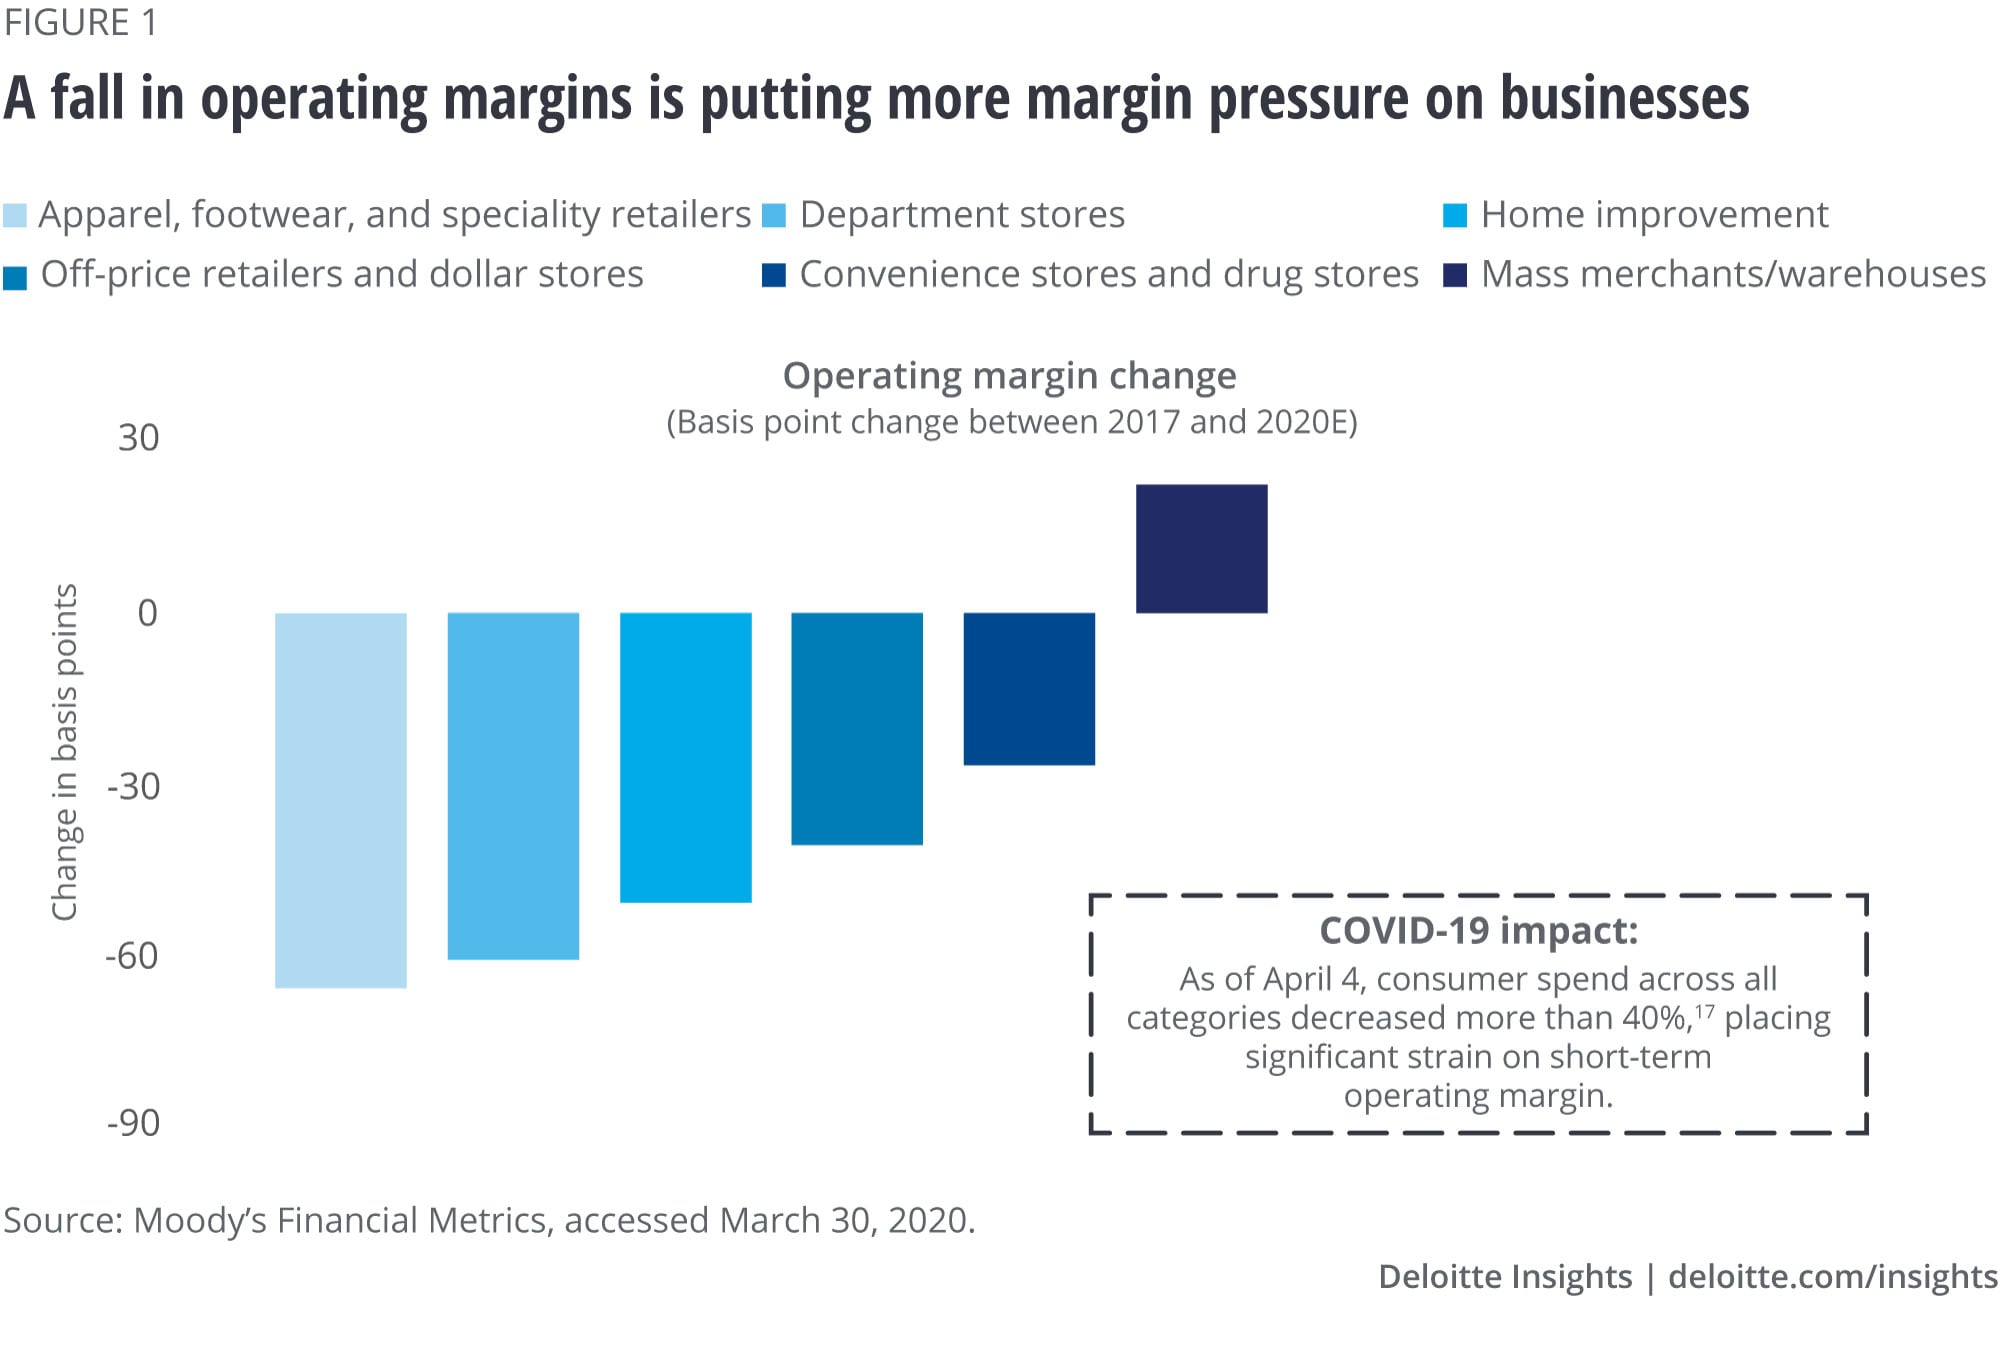 A fall in operating margins is putting more margin pressure on businesses